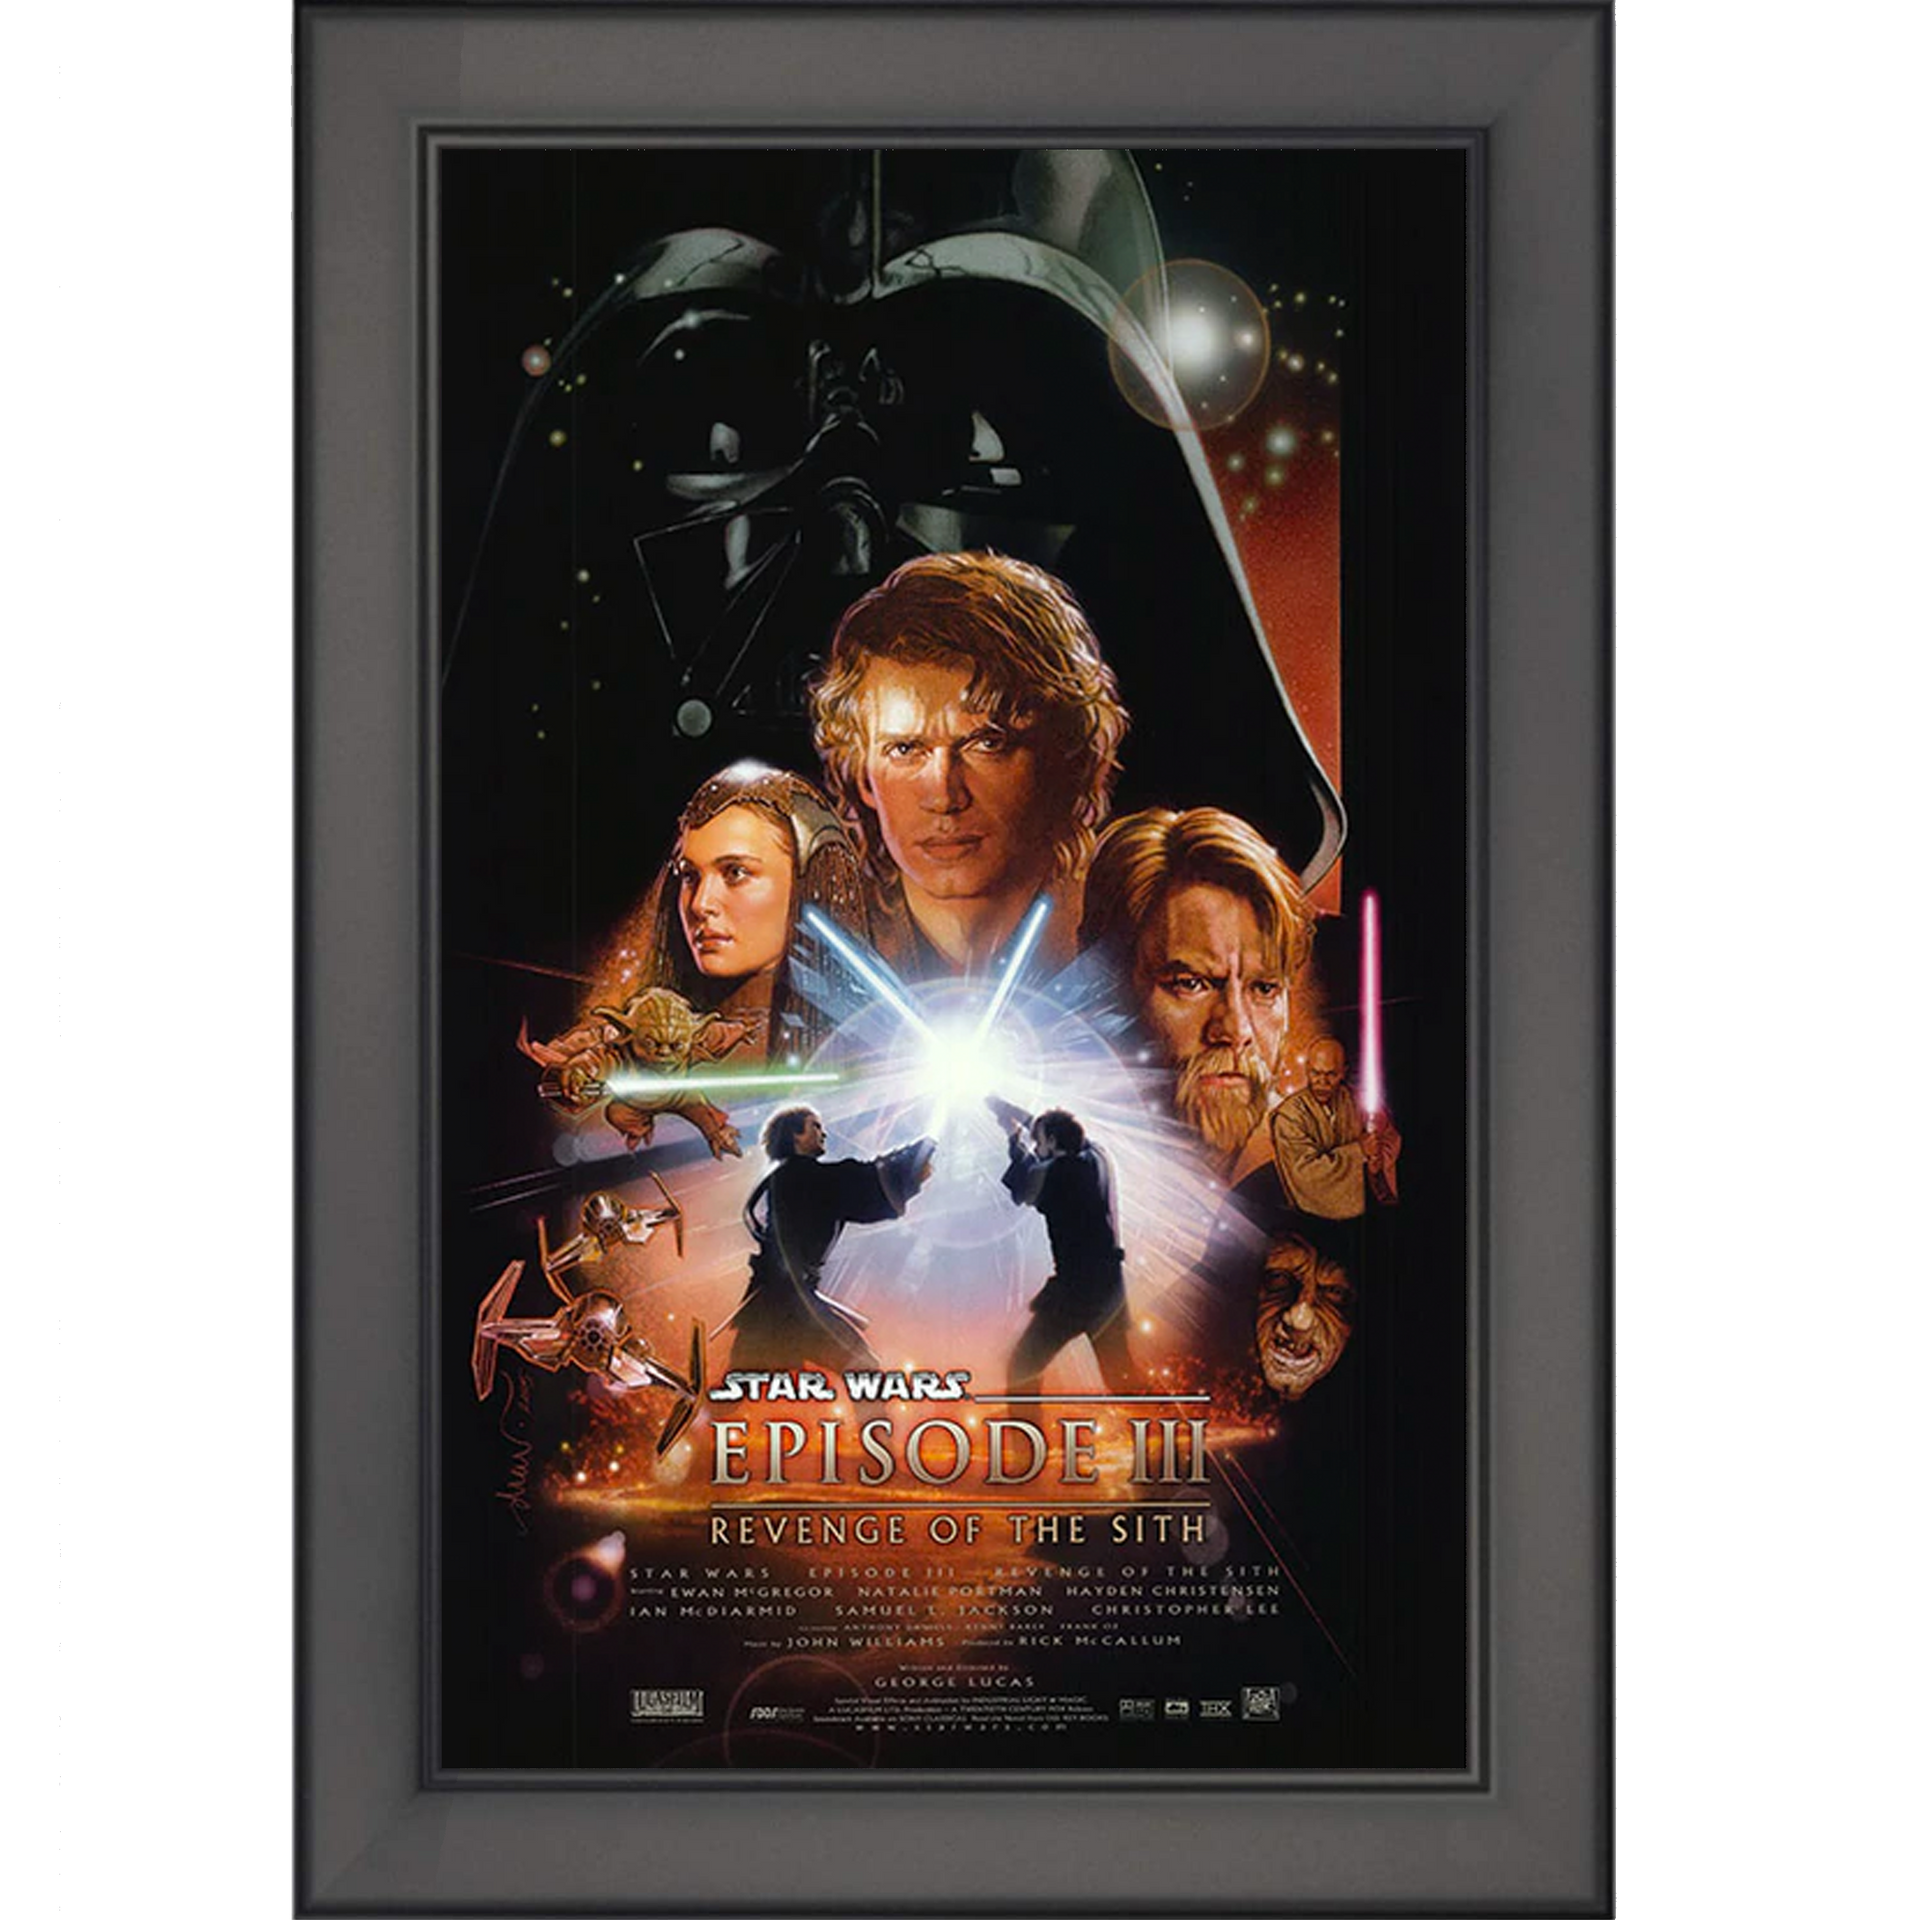 what is the size of a movie poster